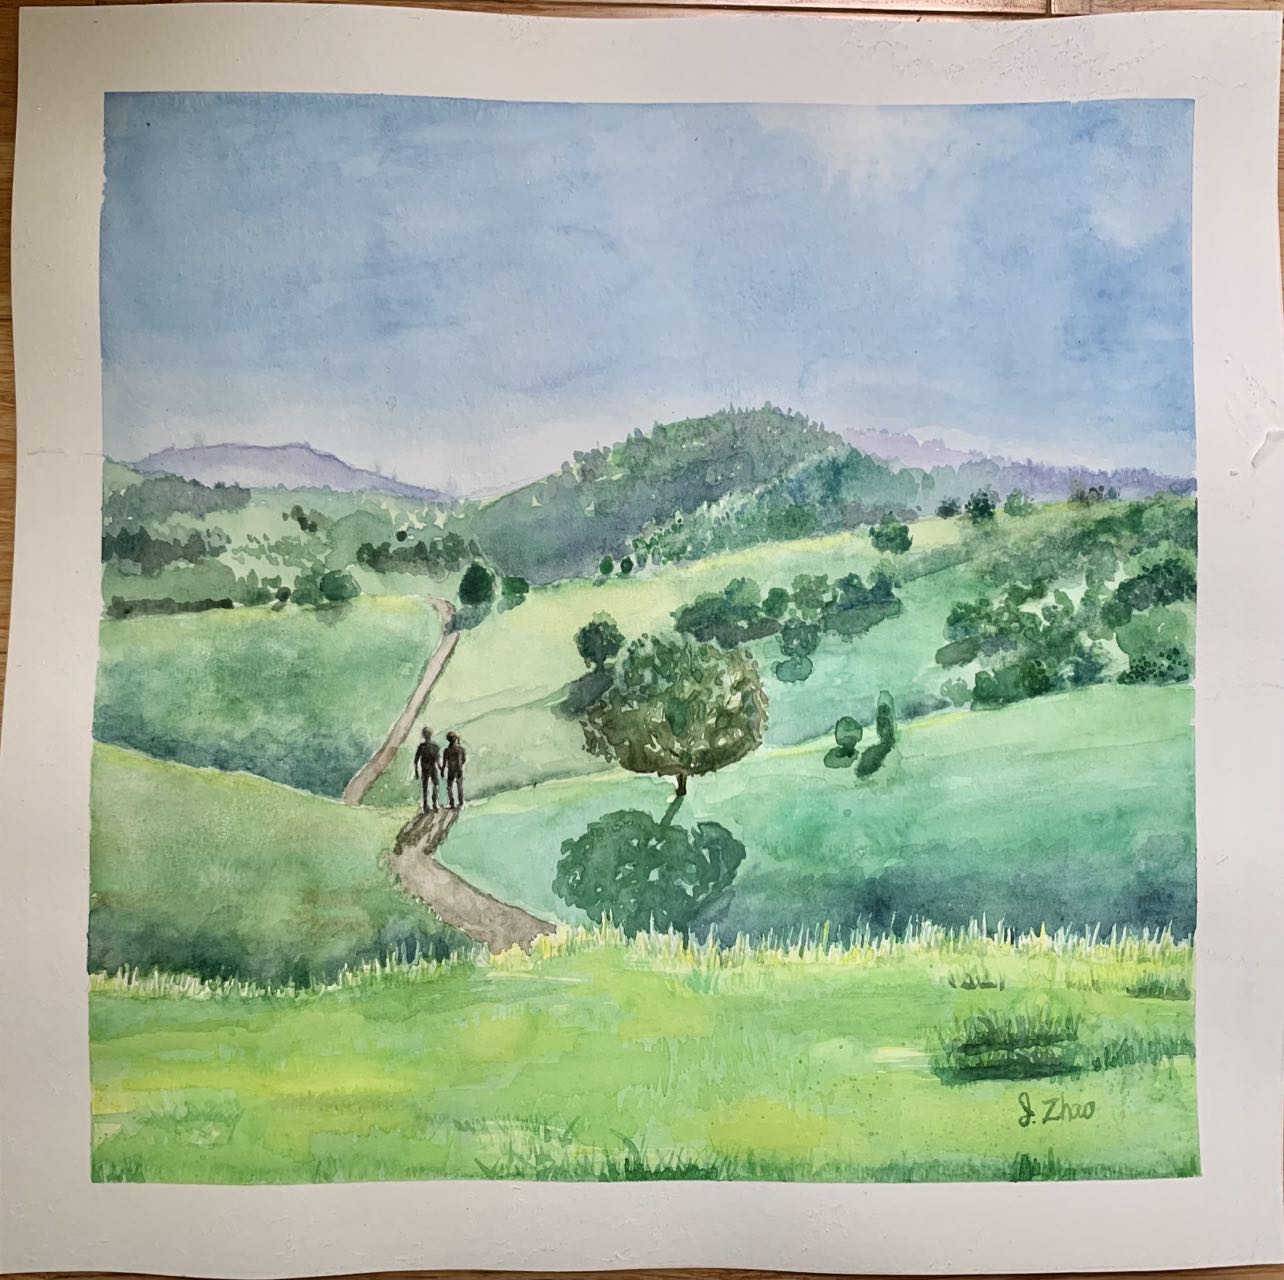 CUSTOM WATERCOLOR PAINTING: LANDSCAPE, HOUSES, FLOWERS, SILHOUETTE FOR BIRTHDAY, ANNIVERSARY, HOLIDAY, GRADUATION CELEBRATION - ARTIST: J. ZHAO